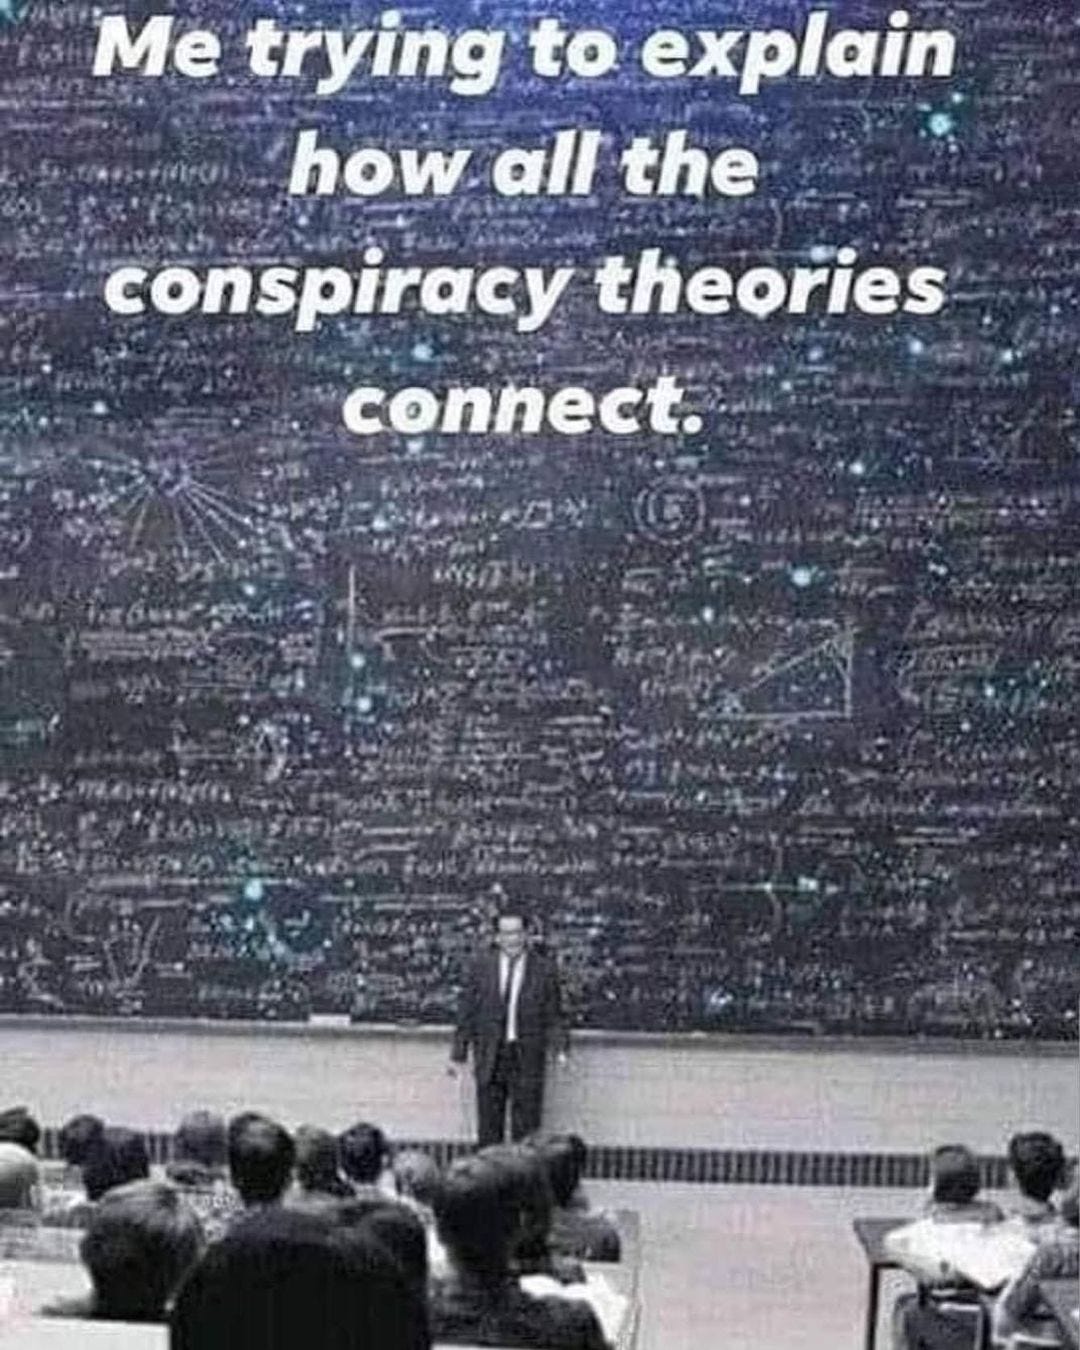 May be an image of text that says 'Me trying to explain howal all the conspiracy theories connect.'